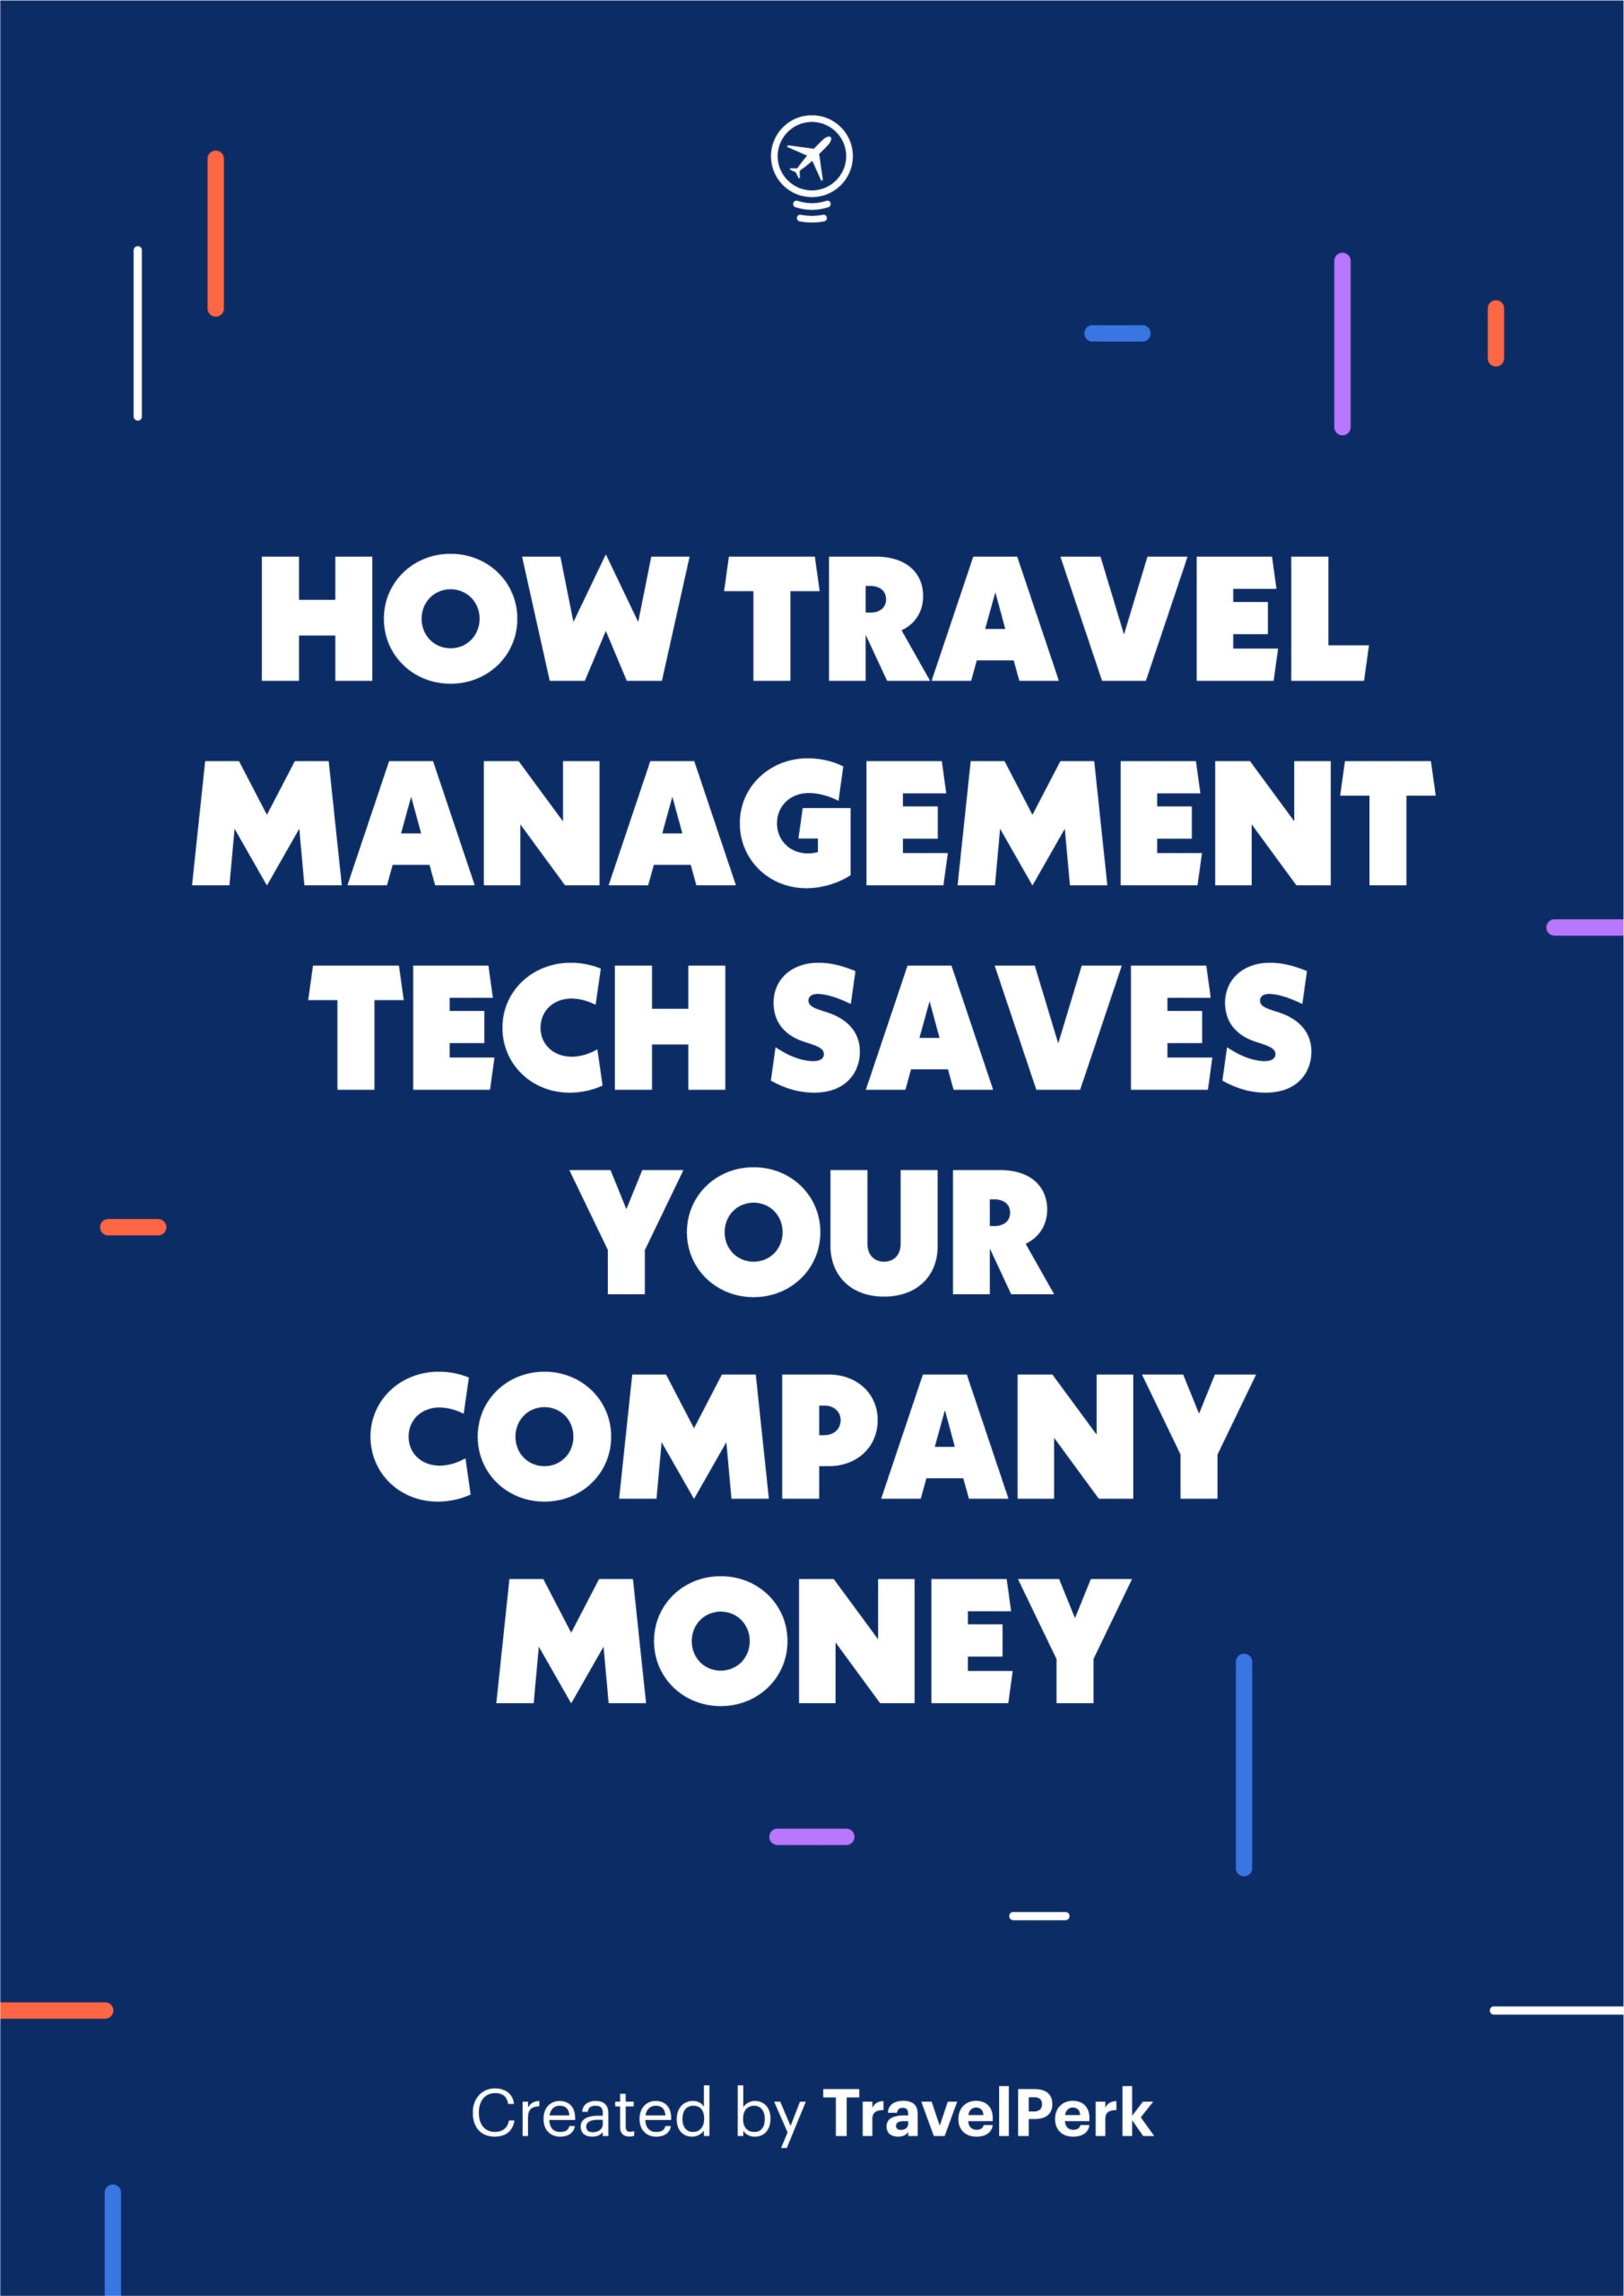 How travel management tech saves your company money